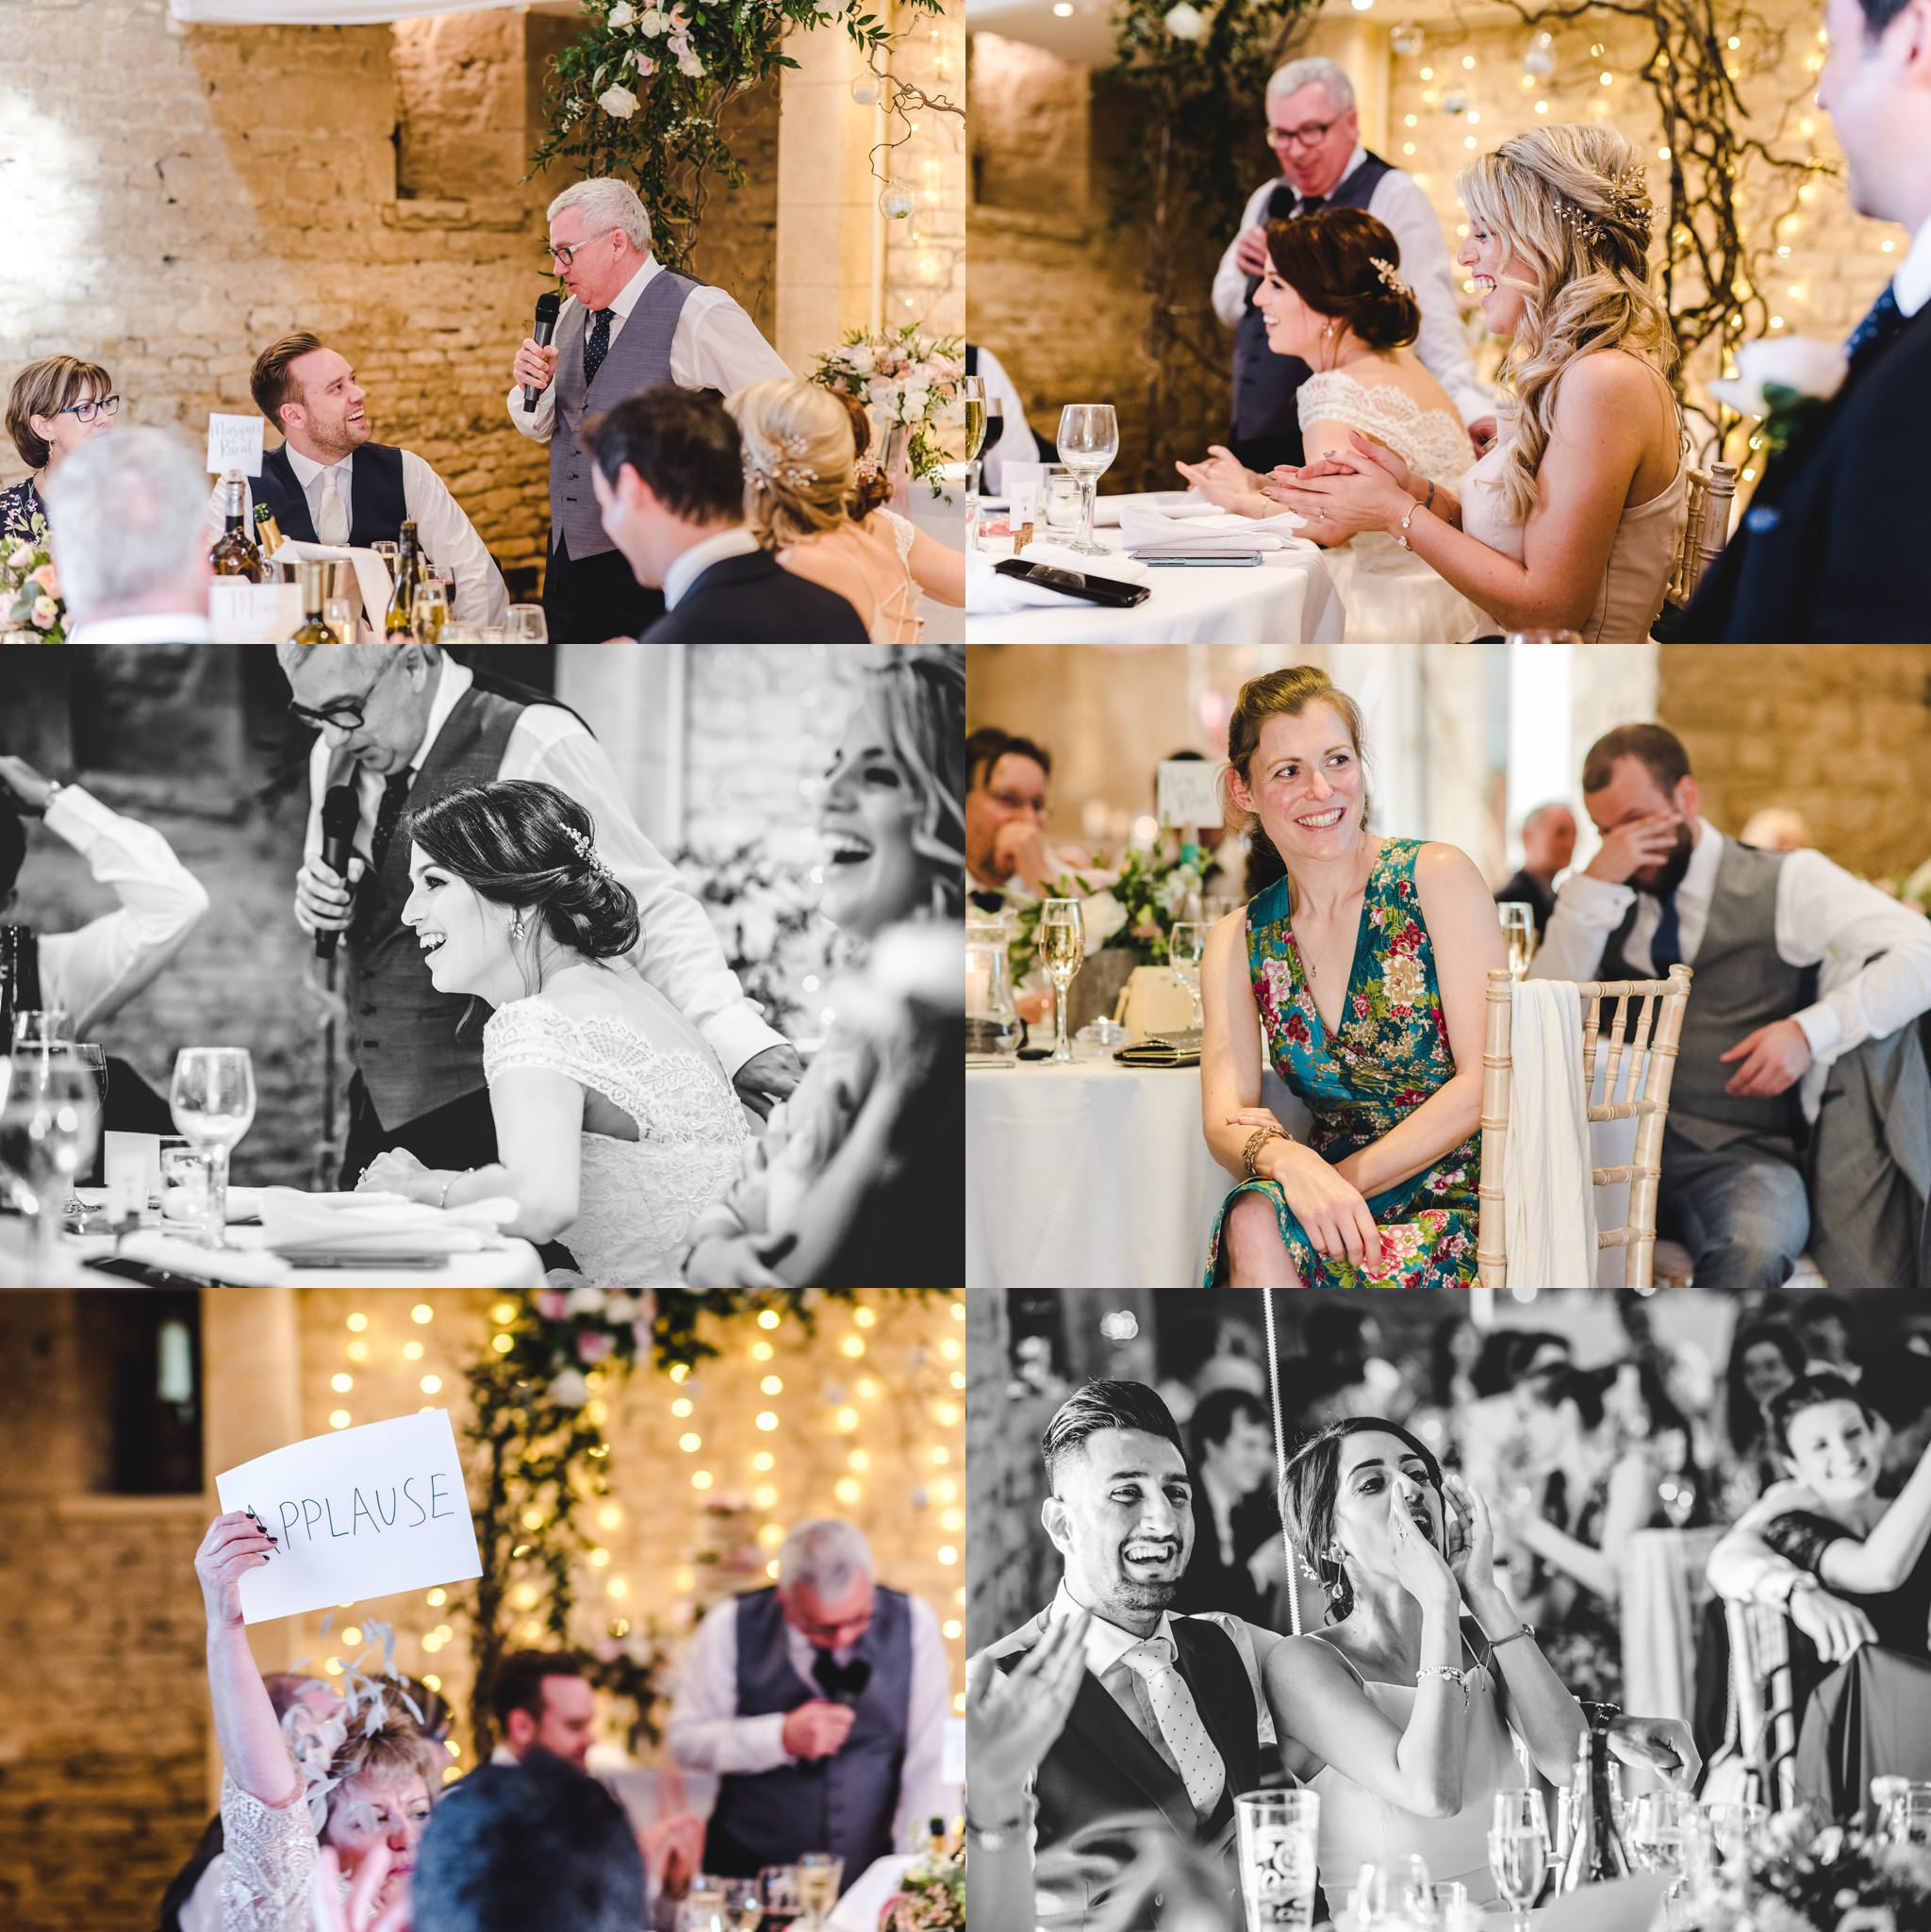 Speeches at the great tythe barn captured by Bigeye Photography